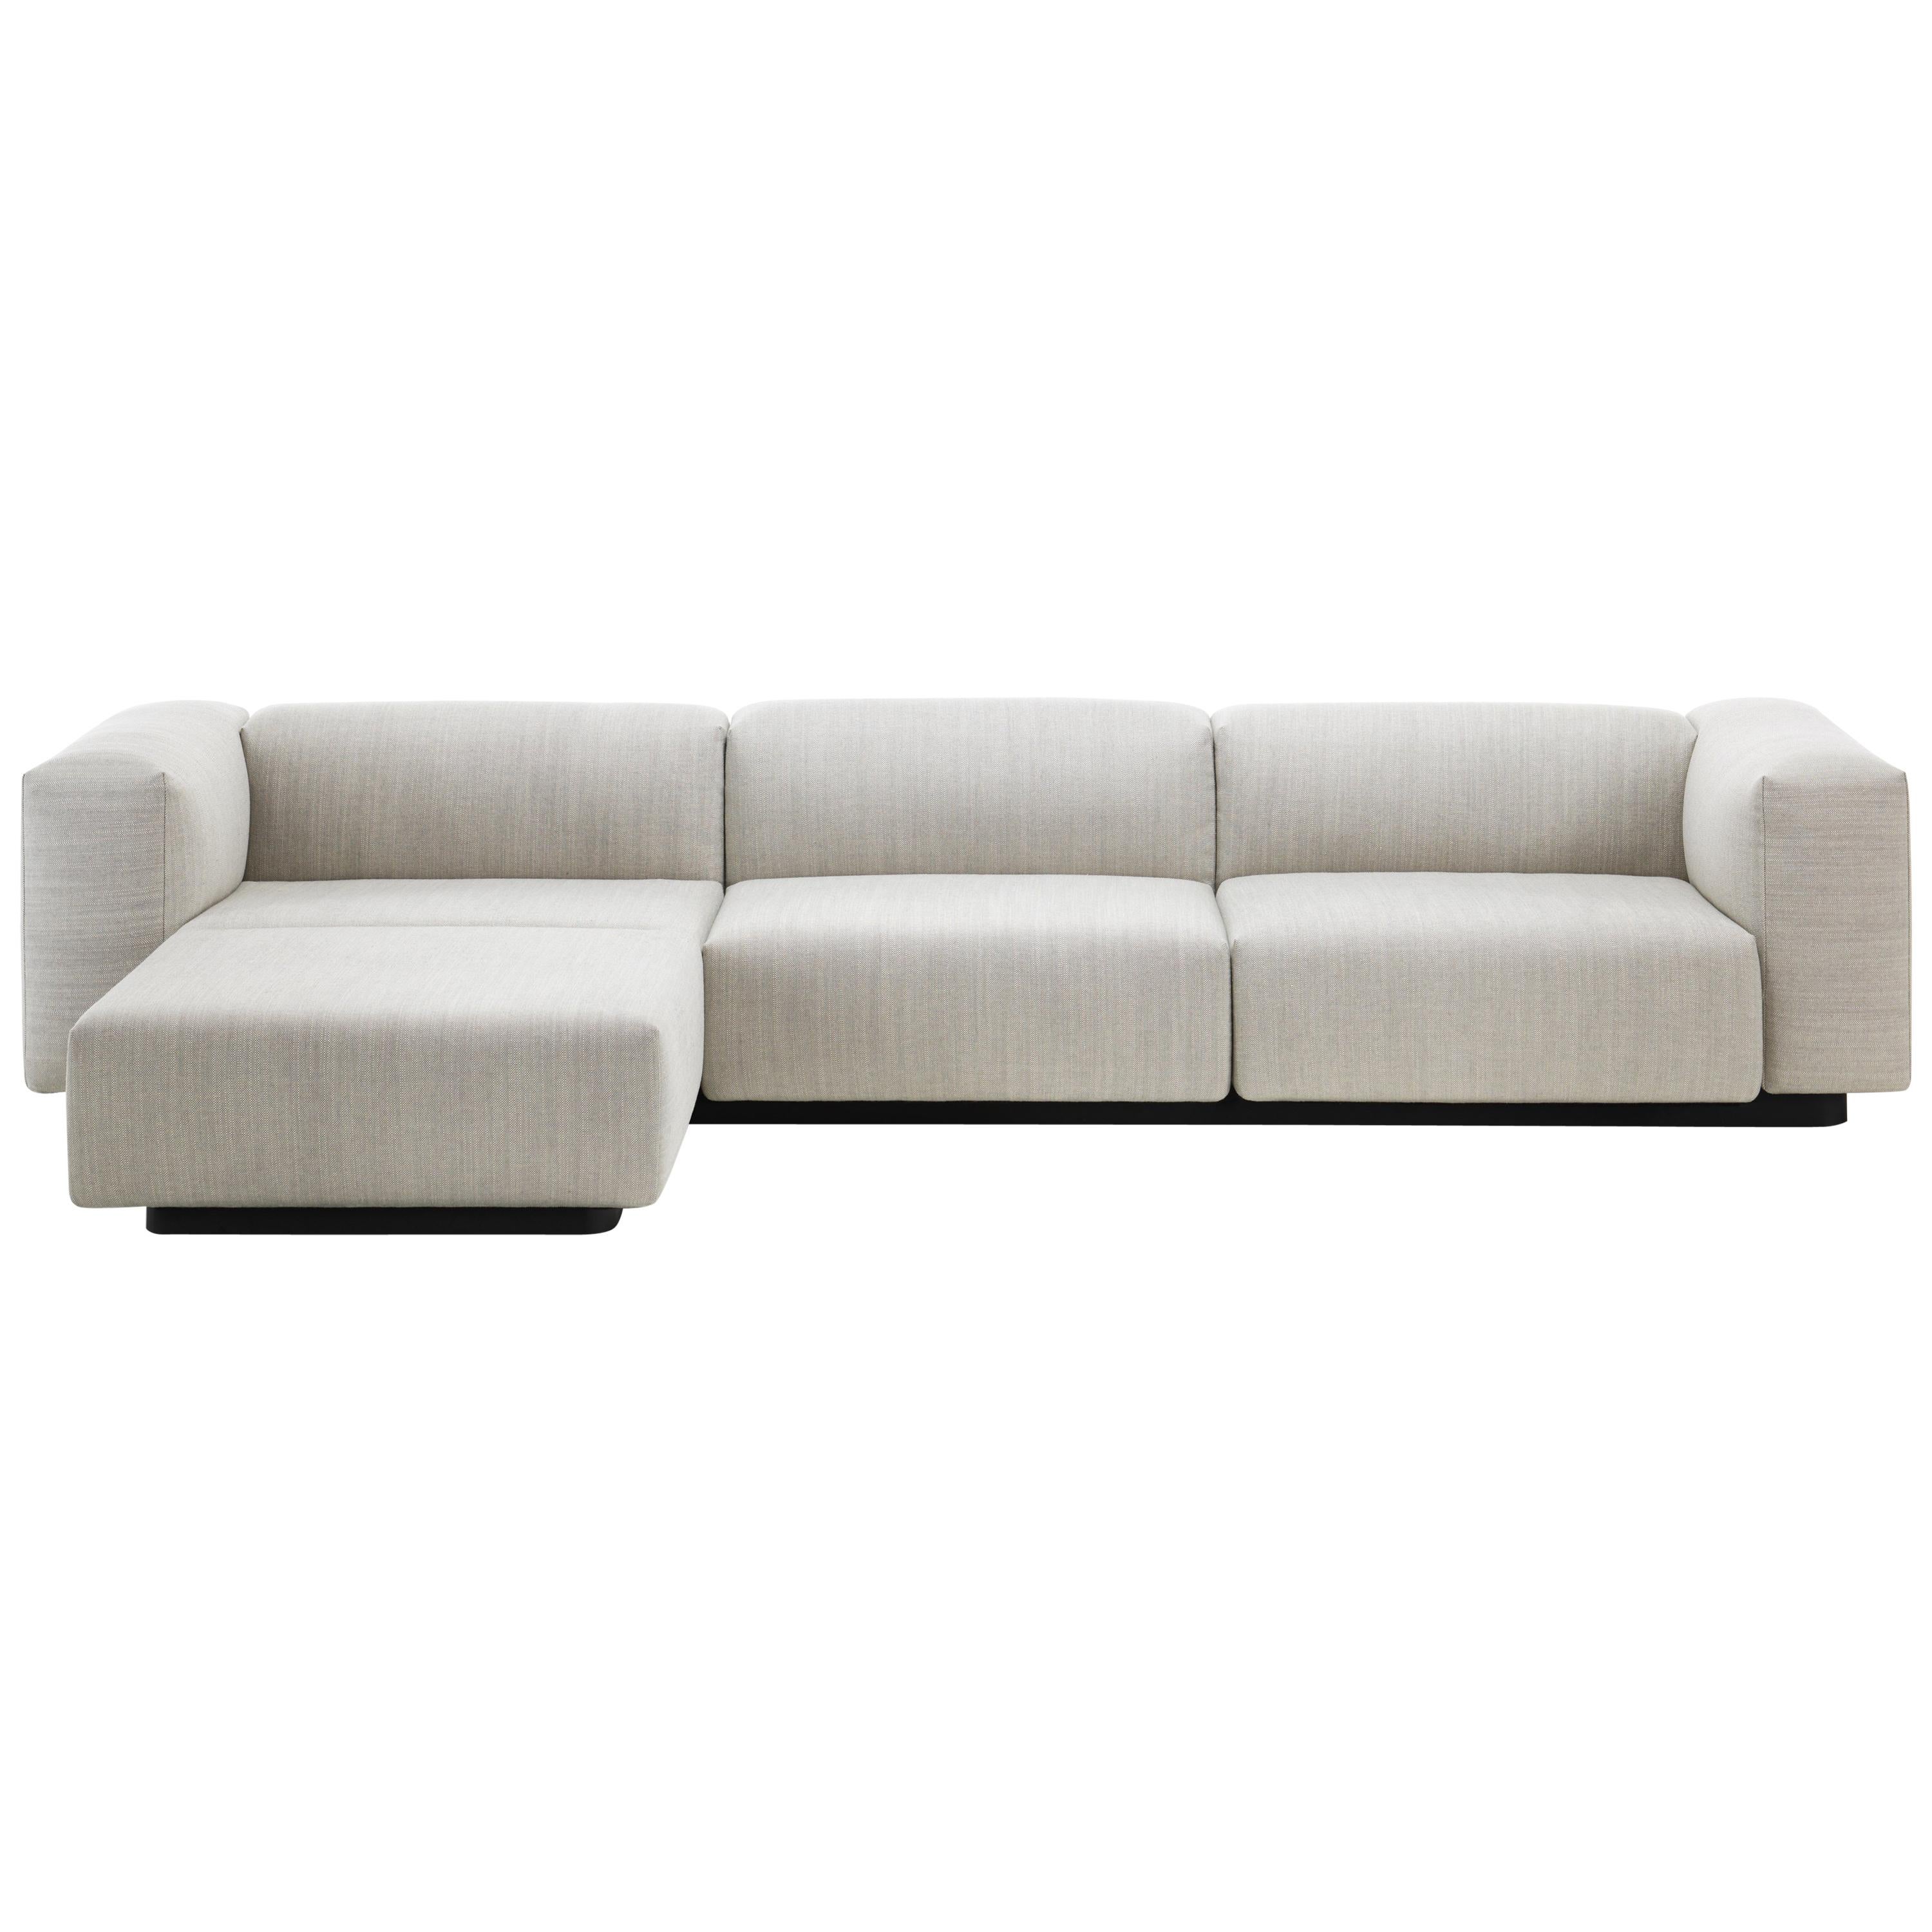 Vitra Soft Modular Sofa with Chaise in Pearl Reed by Jasper Morrison im Angebot